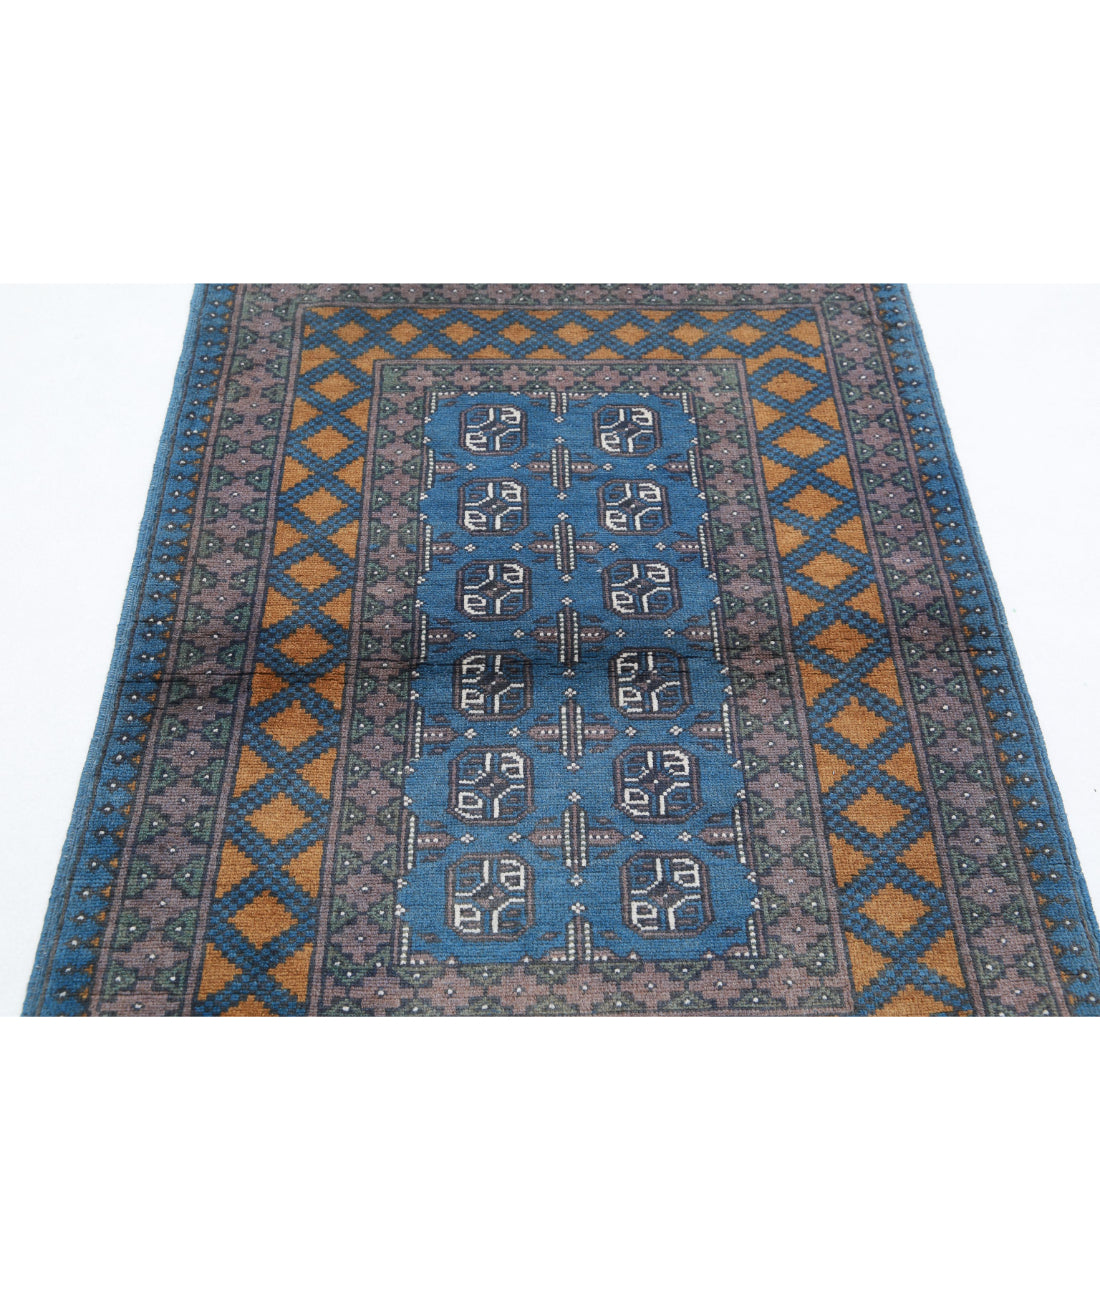 Revival 3'4'' X 4'9'' Hand-Knotted Wool Rug 3'4'' x 4'9'' (100 X 143) / Blue / Gold